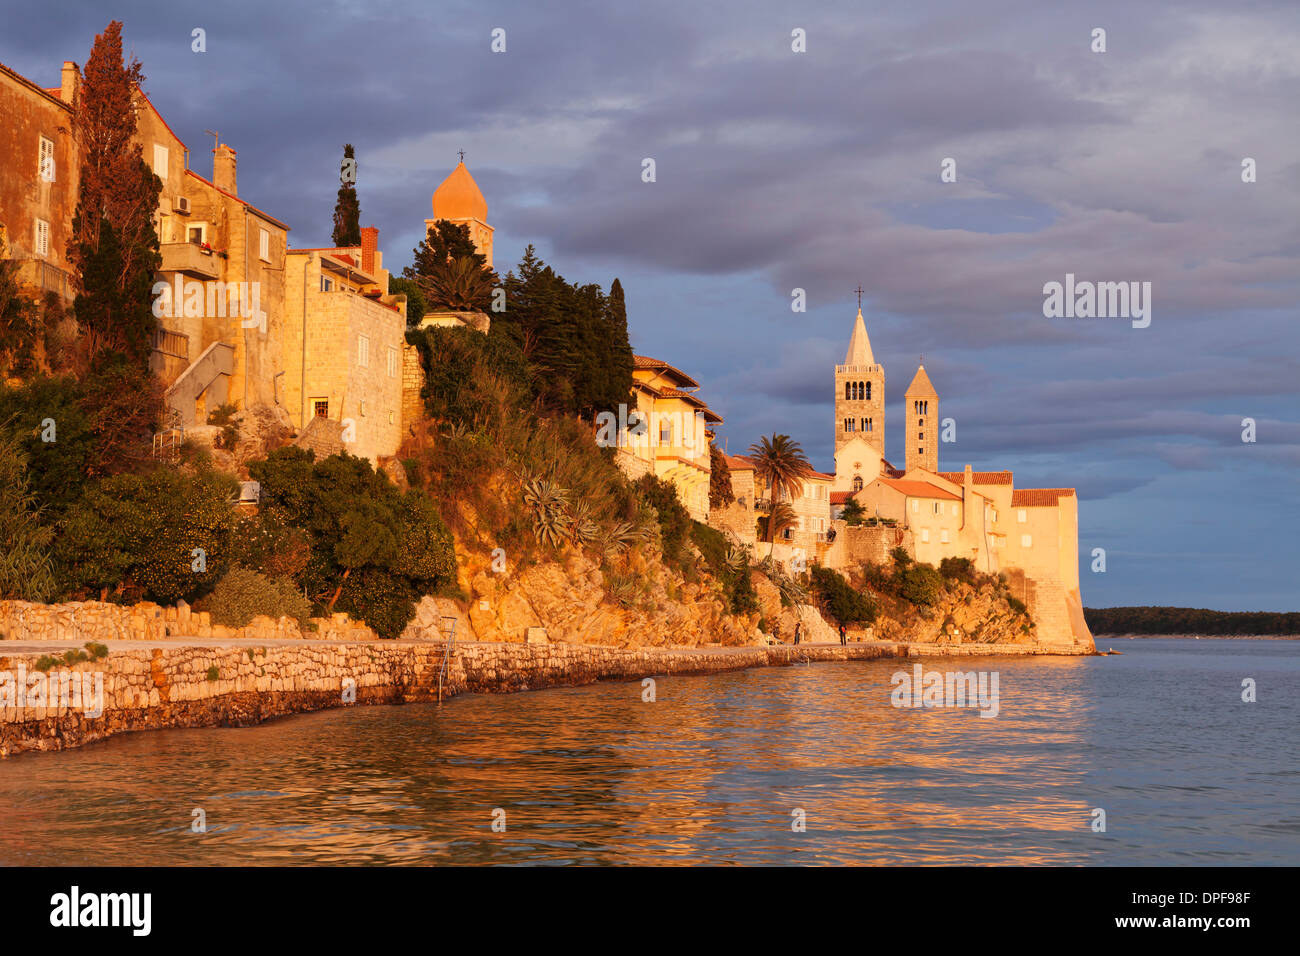 Old town of Rab town with four medieval belltowers at sunset, Rab town, Rab Island, Kvarner region, Dalmatia, Croatia Stock Photo